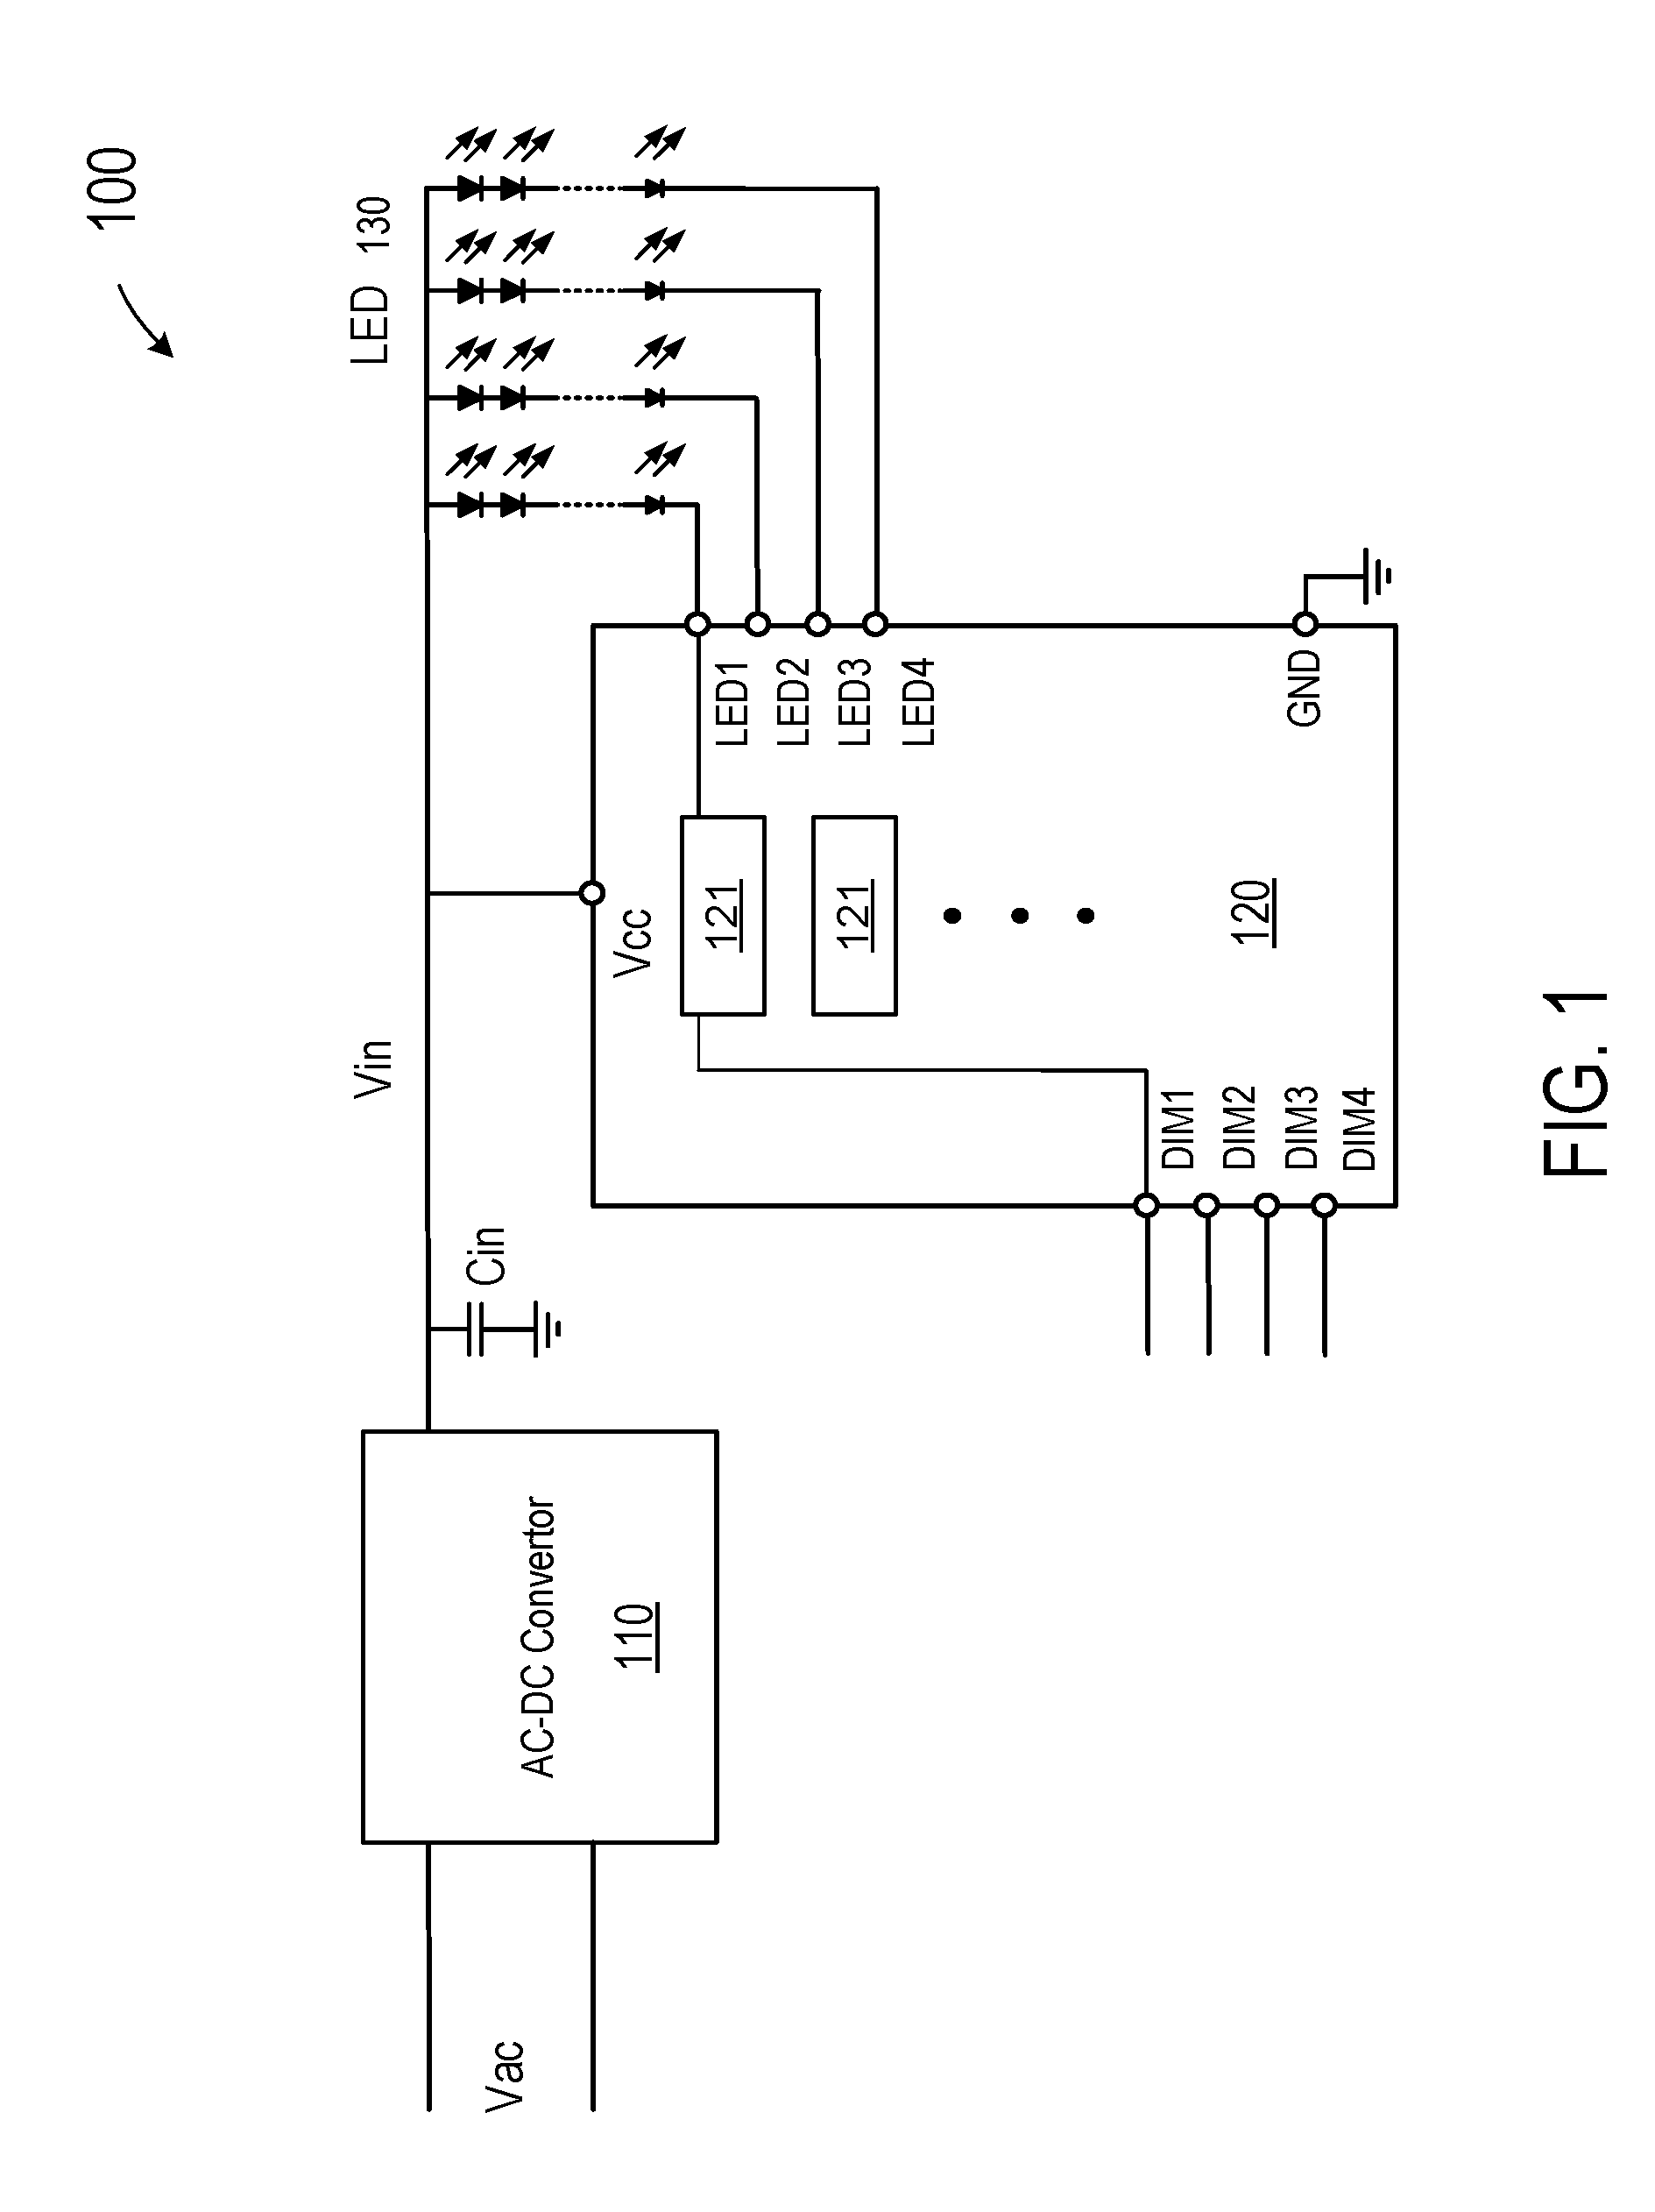 Analog and digital dimming control for LED driver